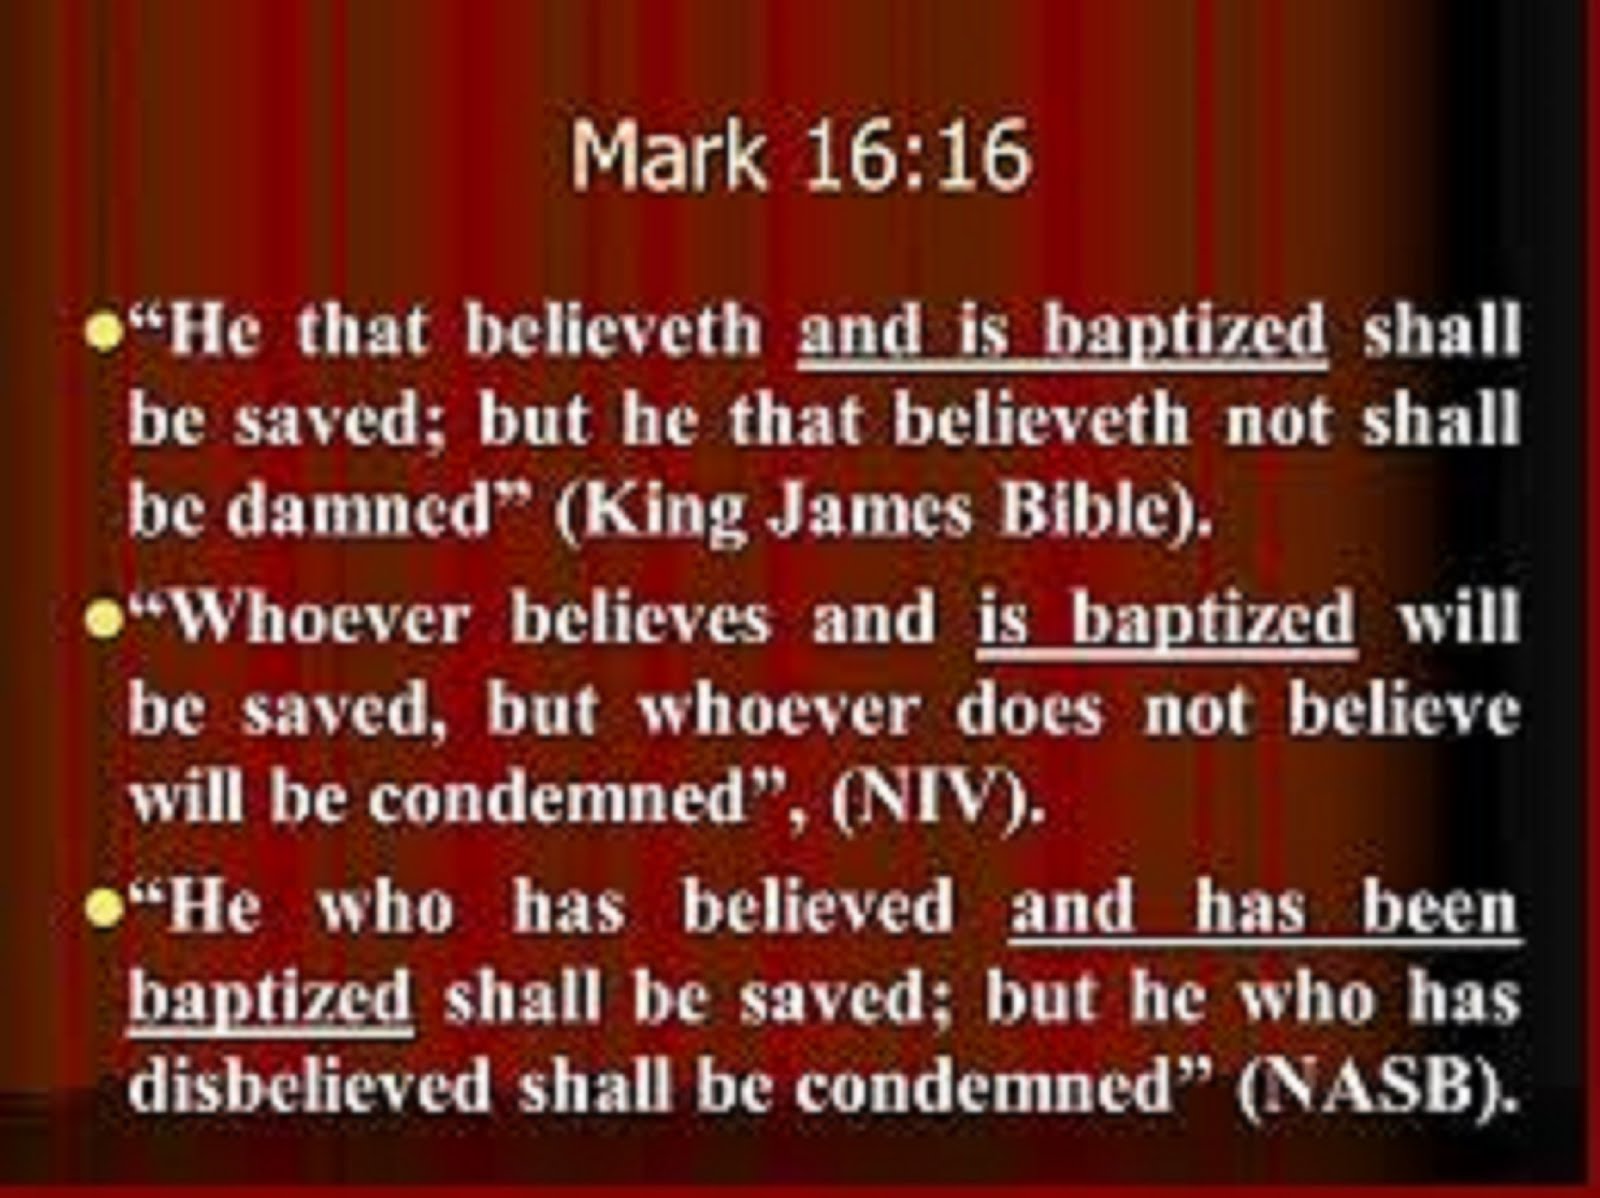 MARK 1616 - HE THAT BELIEVETH AND IS BAPTISED SHALL BE SAVED, BUT HE THAT BELIEVETH NOT SHALL BE DA